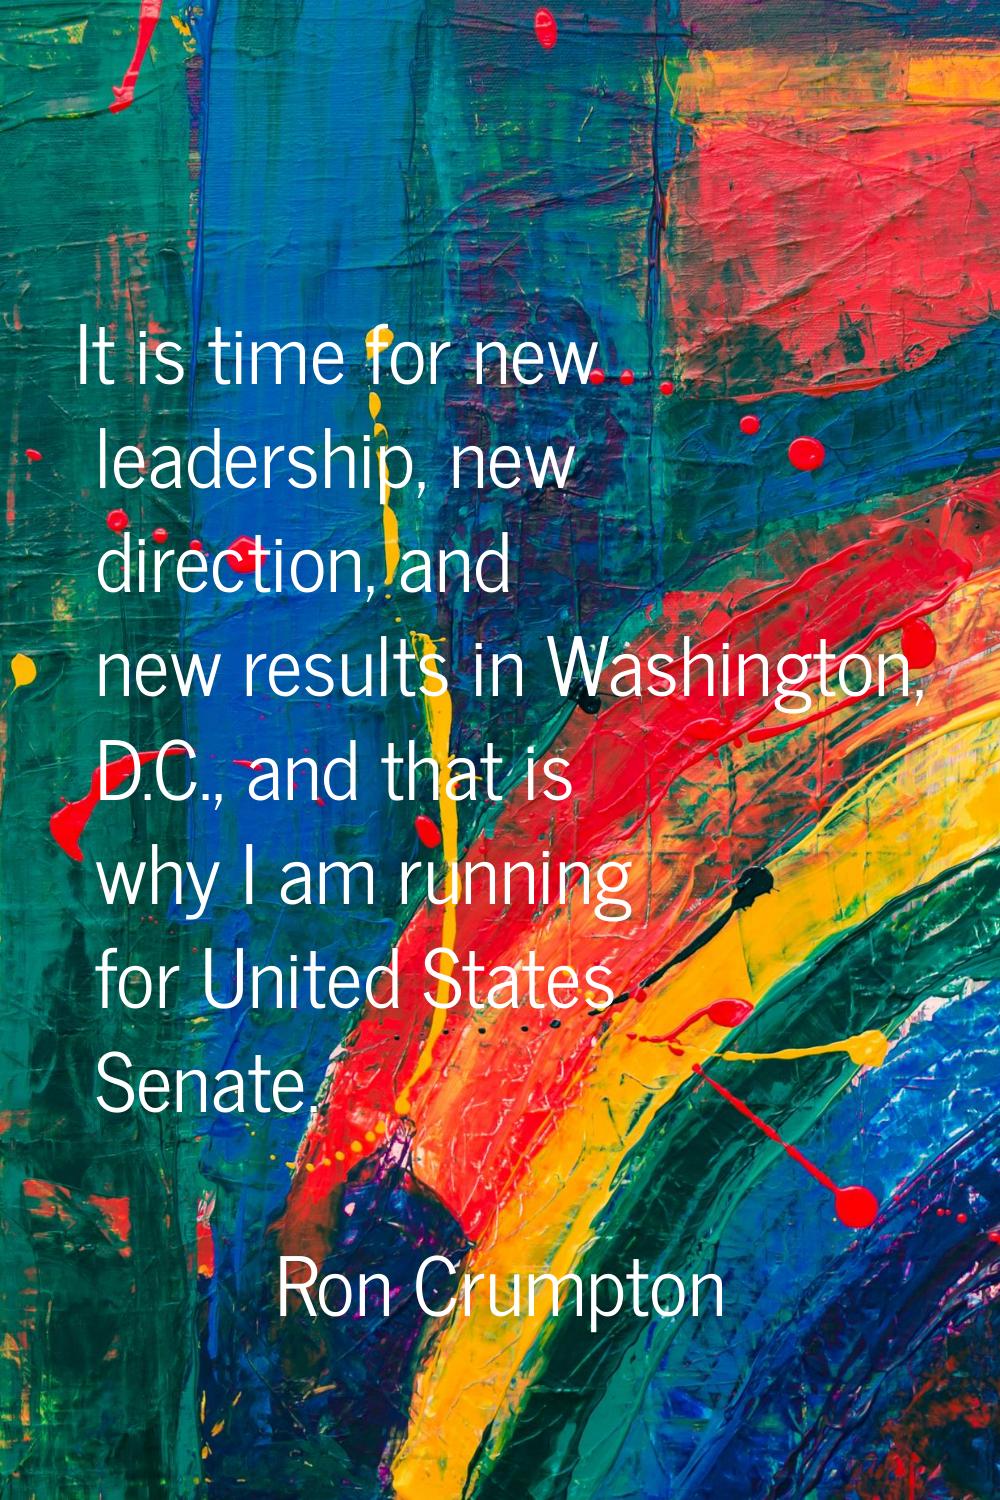 It is time for new leadership, new direction, and new results in Washington, D.C., and that is why 